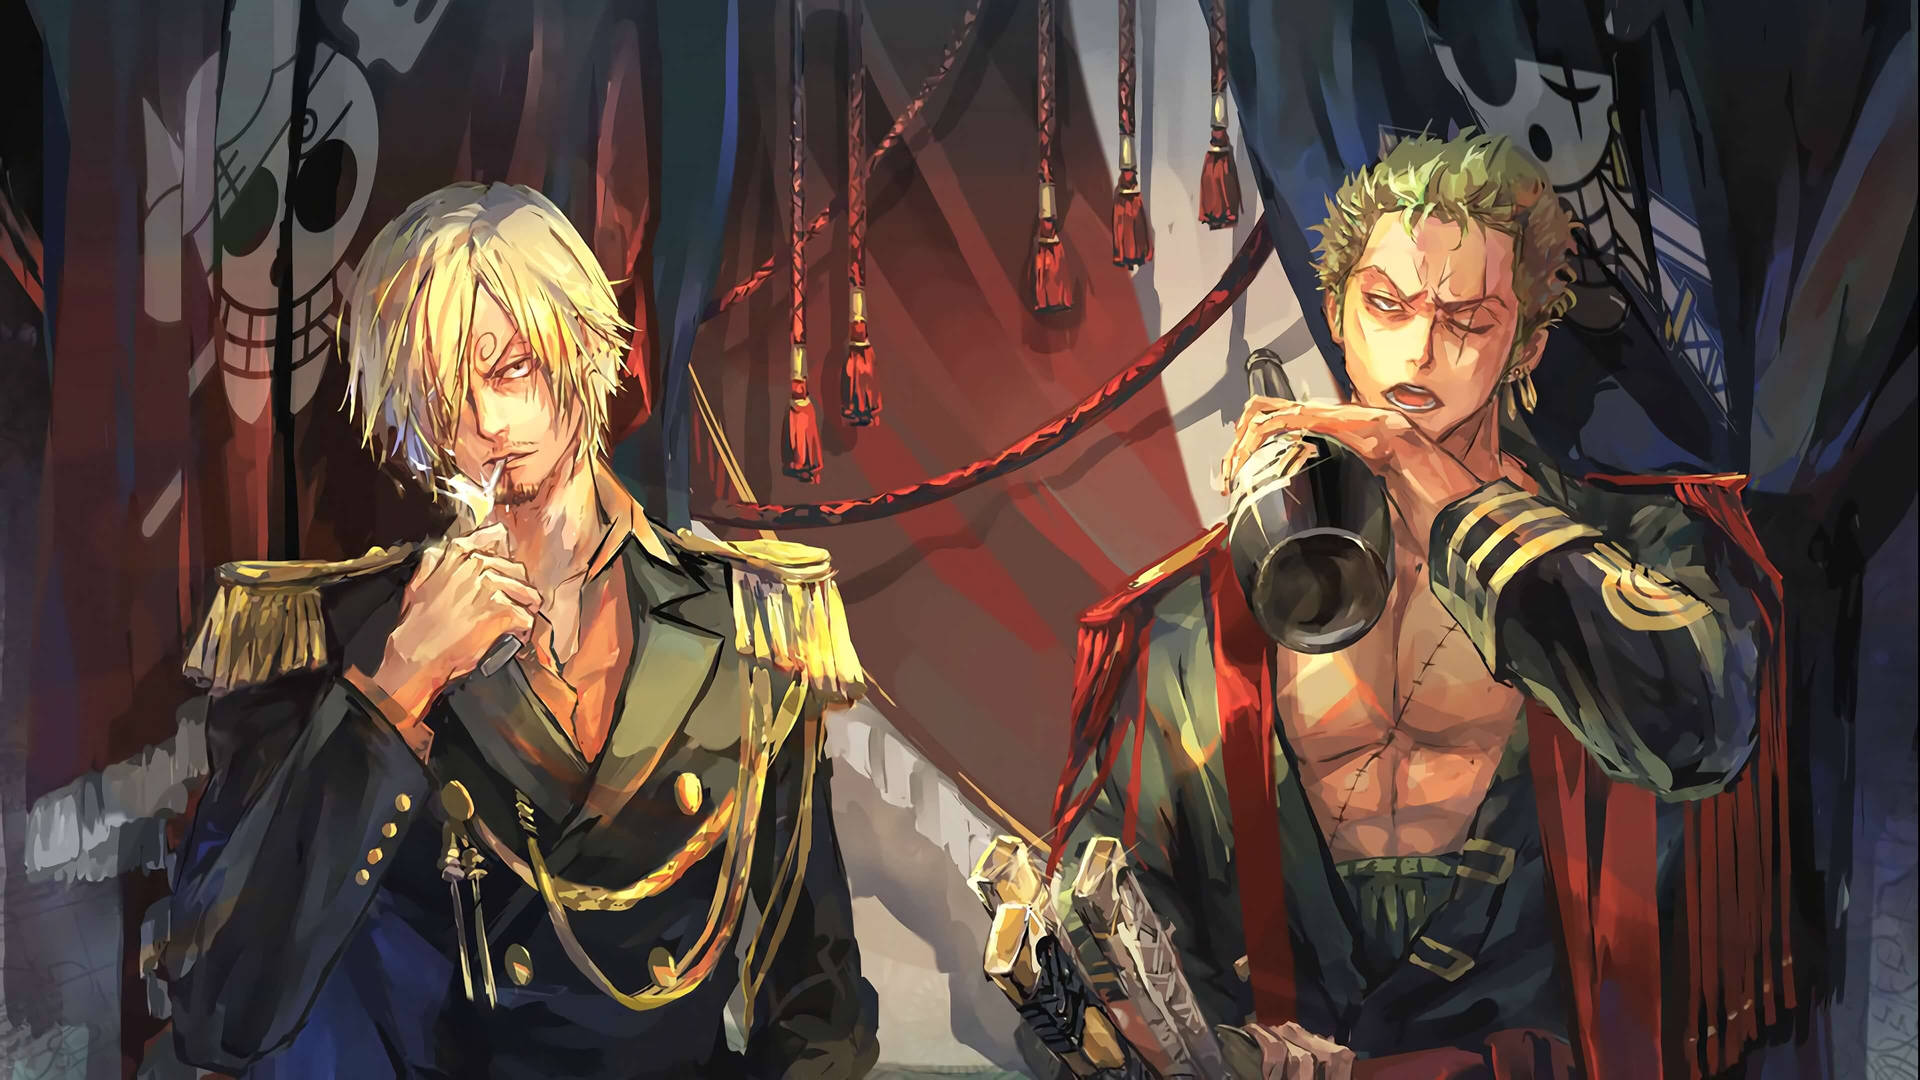 Sanji And Zoro Against Evil Forces In Their Soldier Outfits